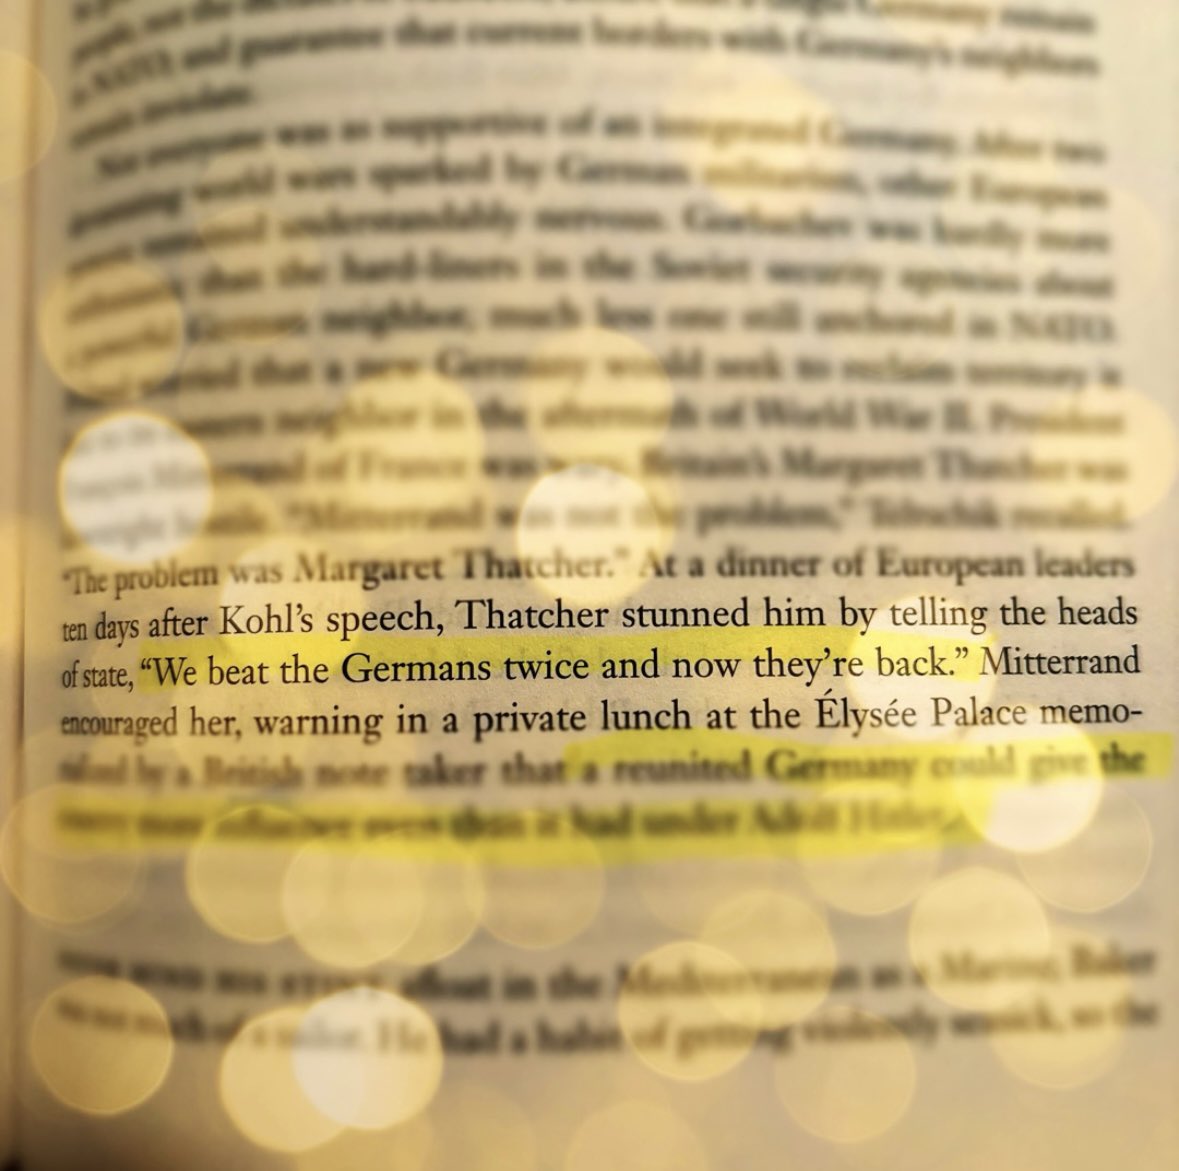 New favorite Margaret Thatcher quote on the reunification of Germany in 1989 #themanwhoranwashington #peterbaker #susanglasser #margaretthatcher #europeanhistory #unitedkingdom #germany #ussr #reunification